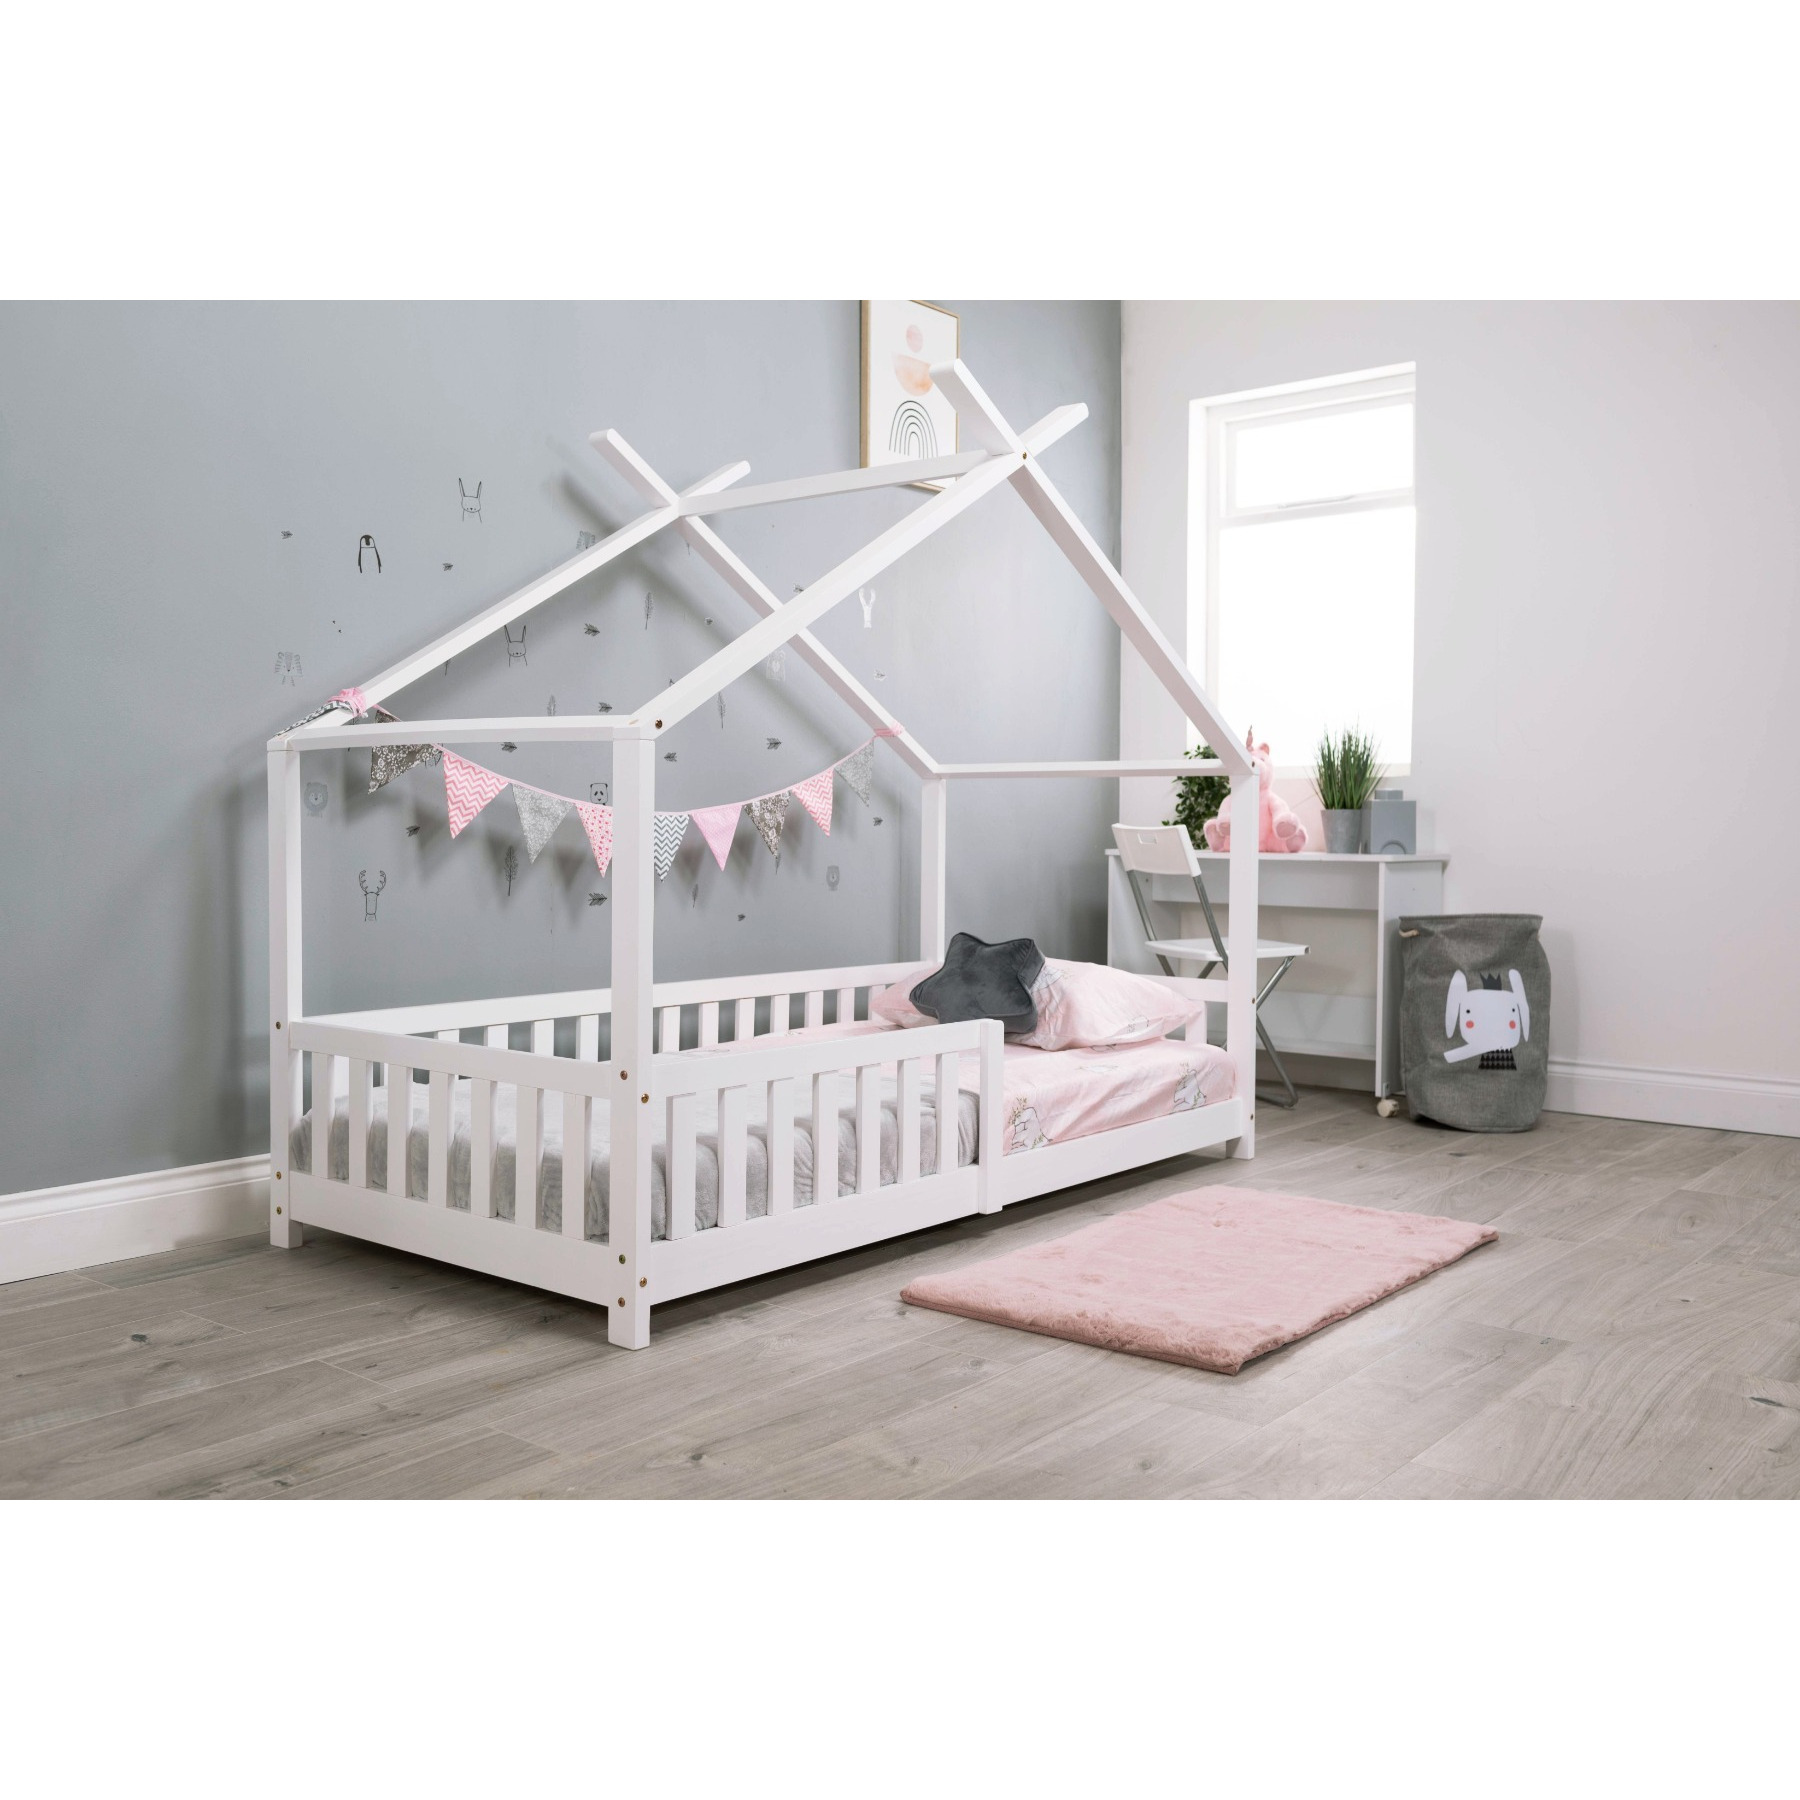 Flair White Wooden Scout Tree Single Bed with Rails - image 1